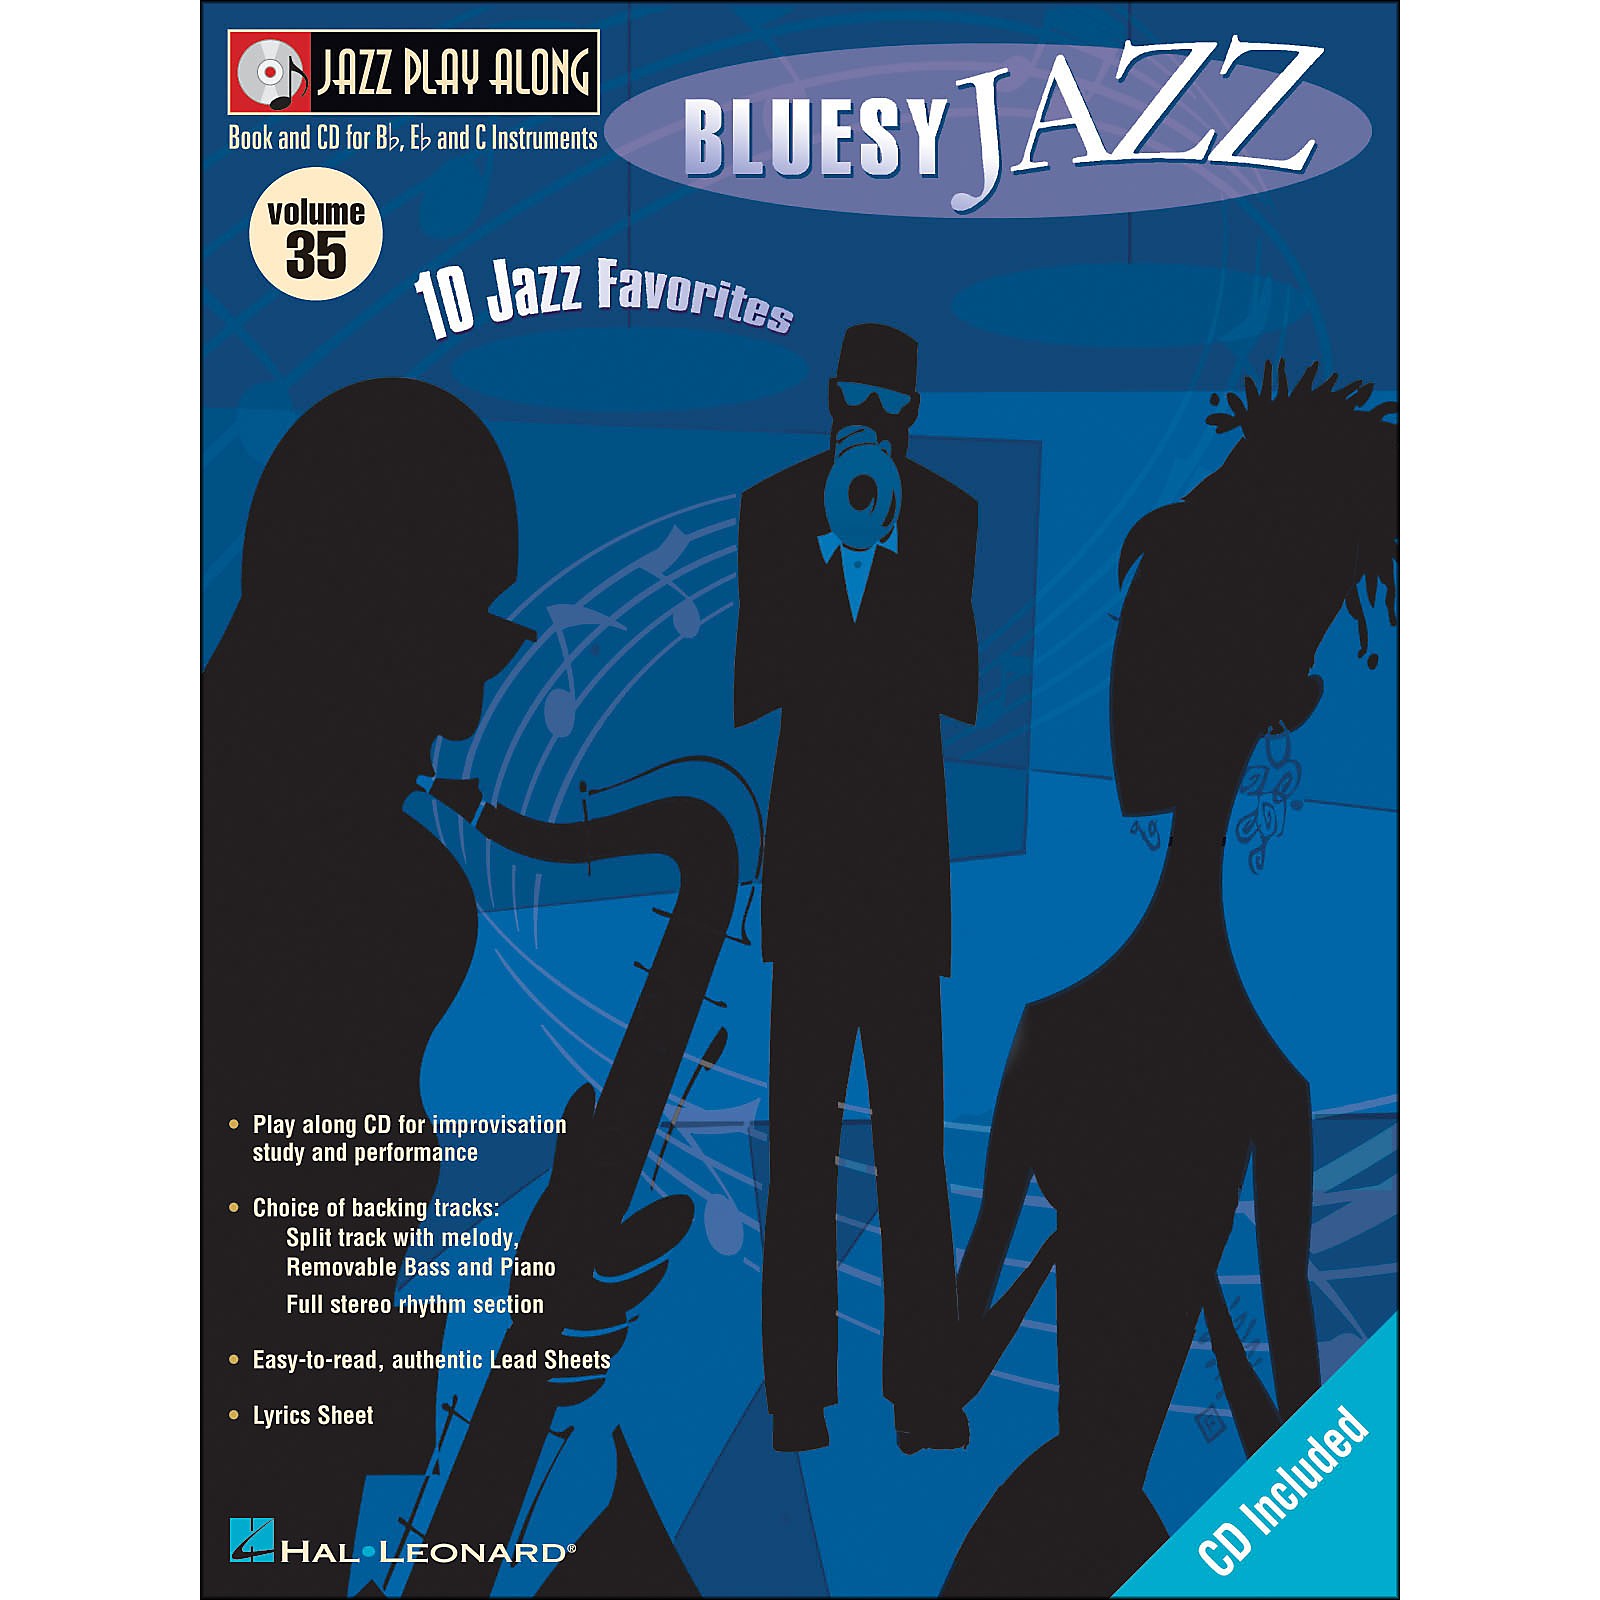 CD Jazz. Just Classic Jazz Ultimate Play along Vol 2. Play along.